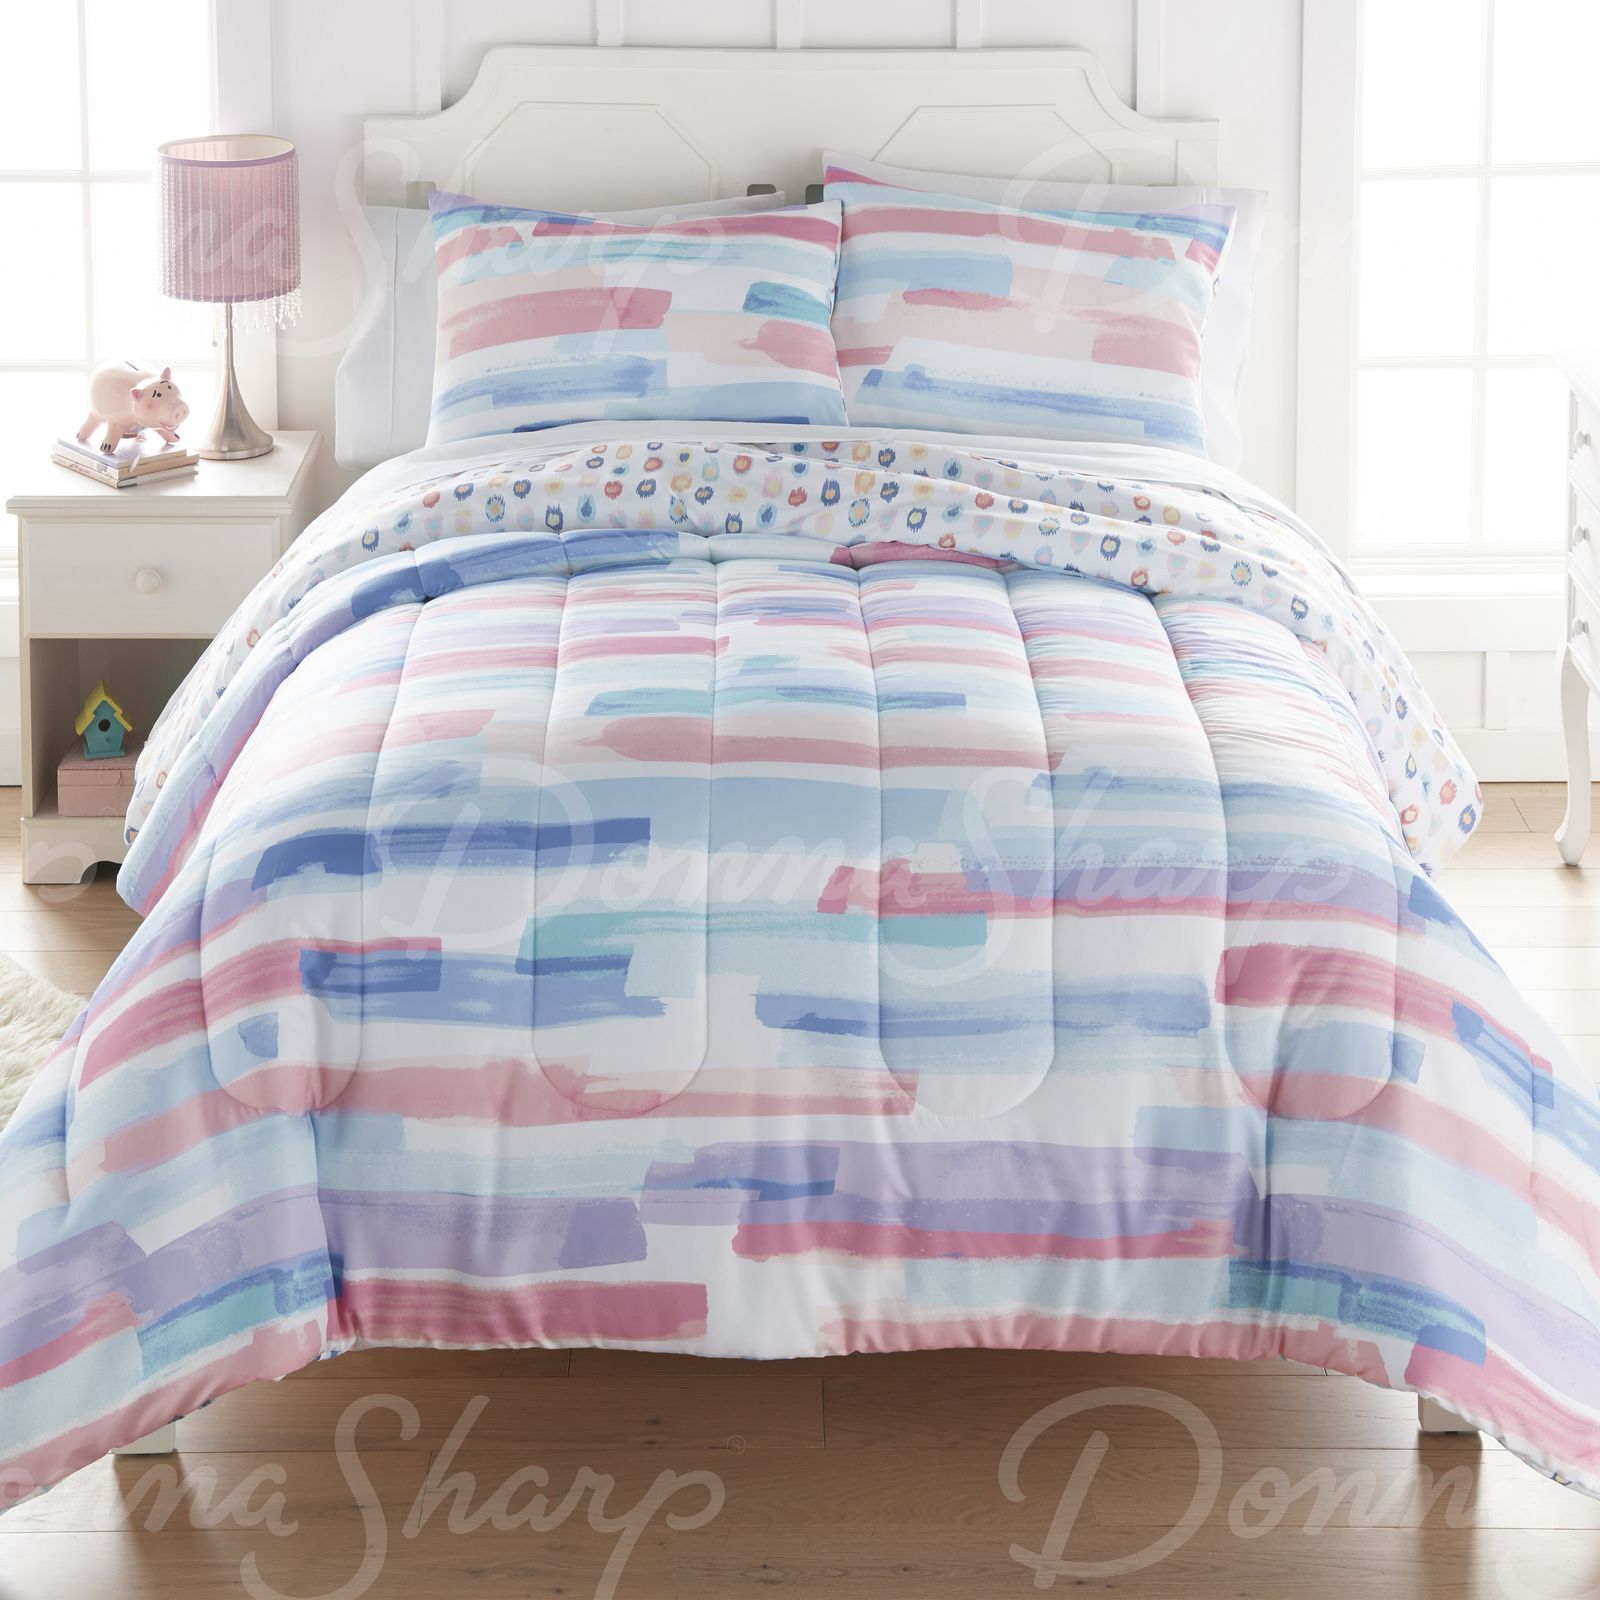 Smoothie 3pc Comforter Bedding Set from Your Lifestyle by Donna